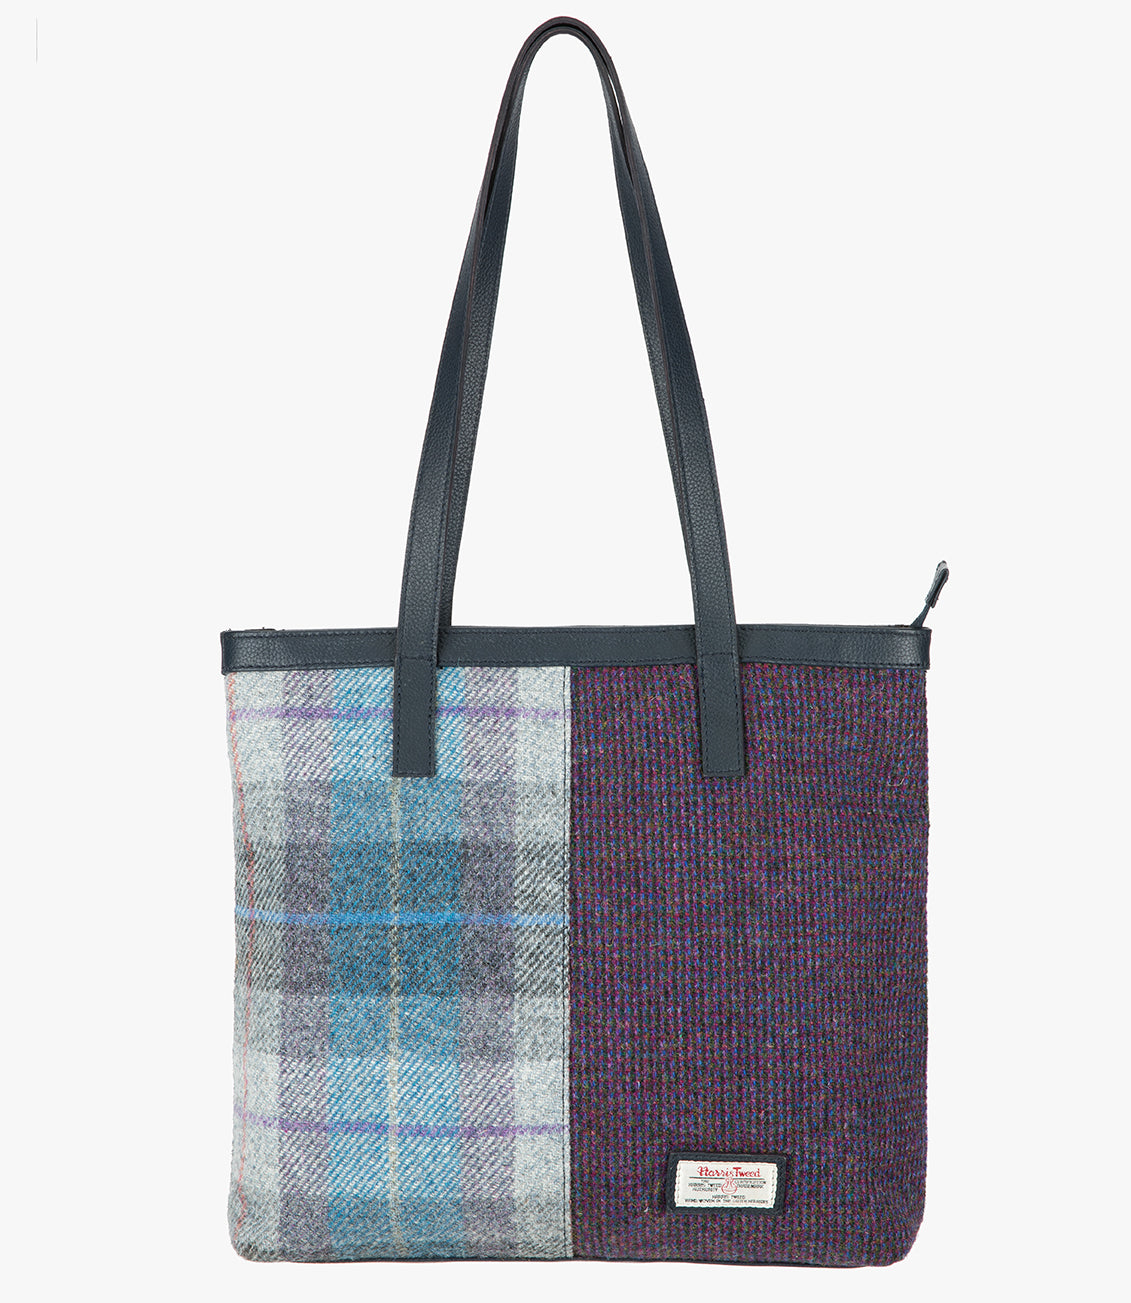 Harris Tweed shopper with a navy blue leather handle that sits comfortably on the shoulder. It also has a navy blue leather trim at the top of the bag. The bag design is in two halves, the left half is Lavender Harris Tweed, this is lilac, grey and blue check. The right side is a subtle purple and black check. It also has a small rectangular Harris Tweed logo at the bottom right.